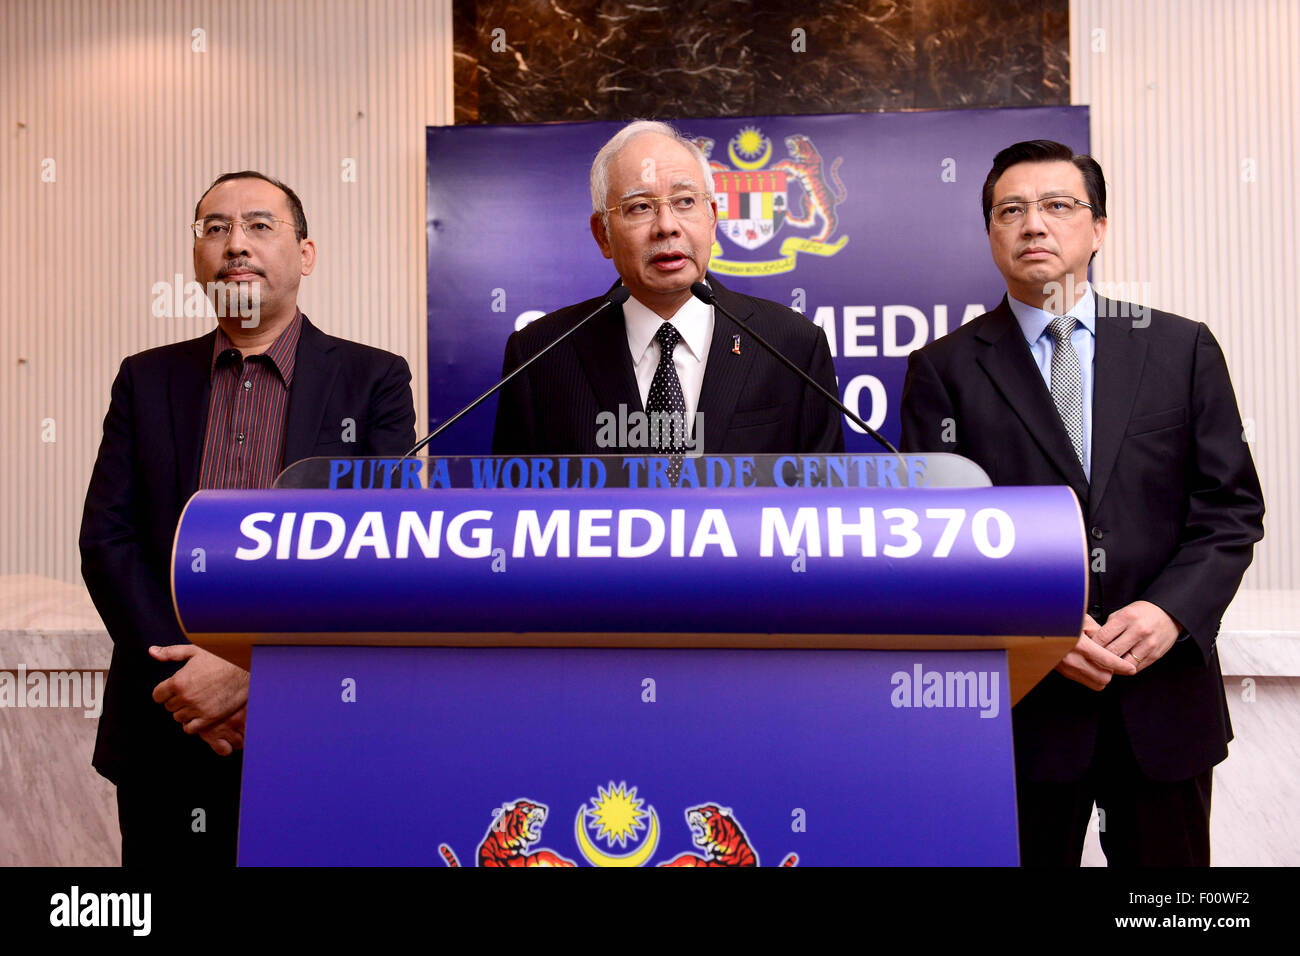 Kuala Lumpur, Malaysia. 5th Aug, 2015. Malaysian Prime Minister Najib Razak (C) attends a press conference on the missing Malaysian Airlines flight MH370 in Kuala Lumpur, Malaysia, Aug. 5, 2015. Verification had confirmed that the debris discovered on the Reunion Island belongs to the missing Malaysian Airlines flight MH370, Malaysian Prime Minister Najib Razak announced here early on Thursday. Credit:  Chong Voon Chung/Xinhua/Alamy Live News Stock Photo